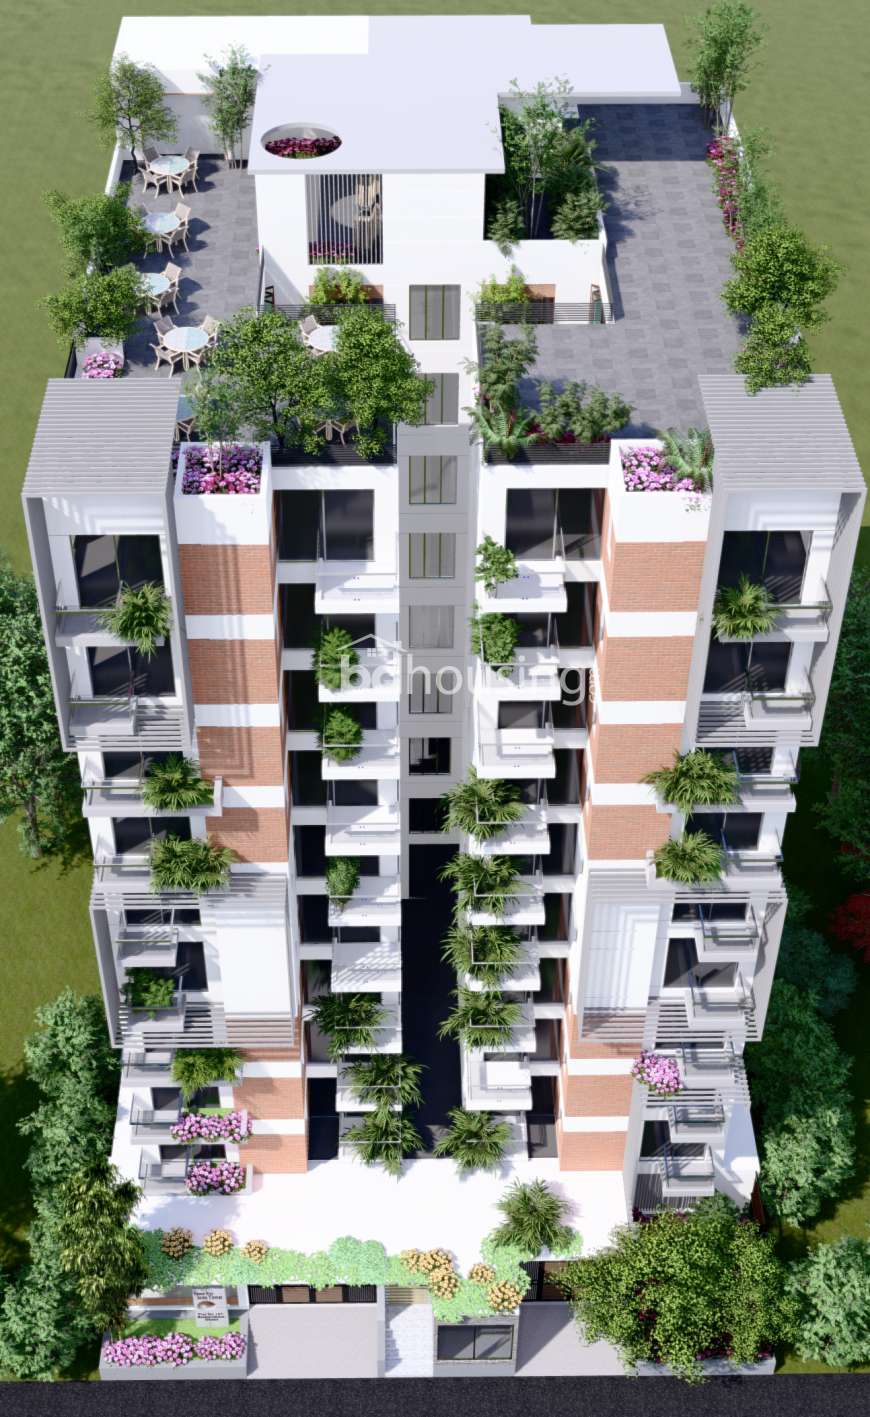 Upcoming project- 50% less Luxury Home @Dreamway icon Tower, Apartment/Flats at Bashundhara R/A